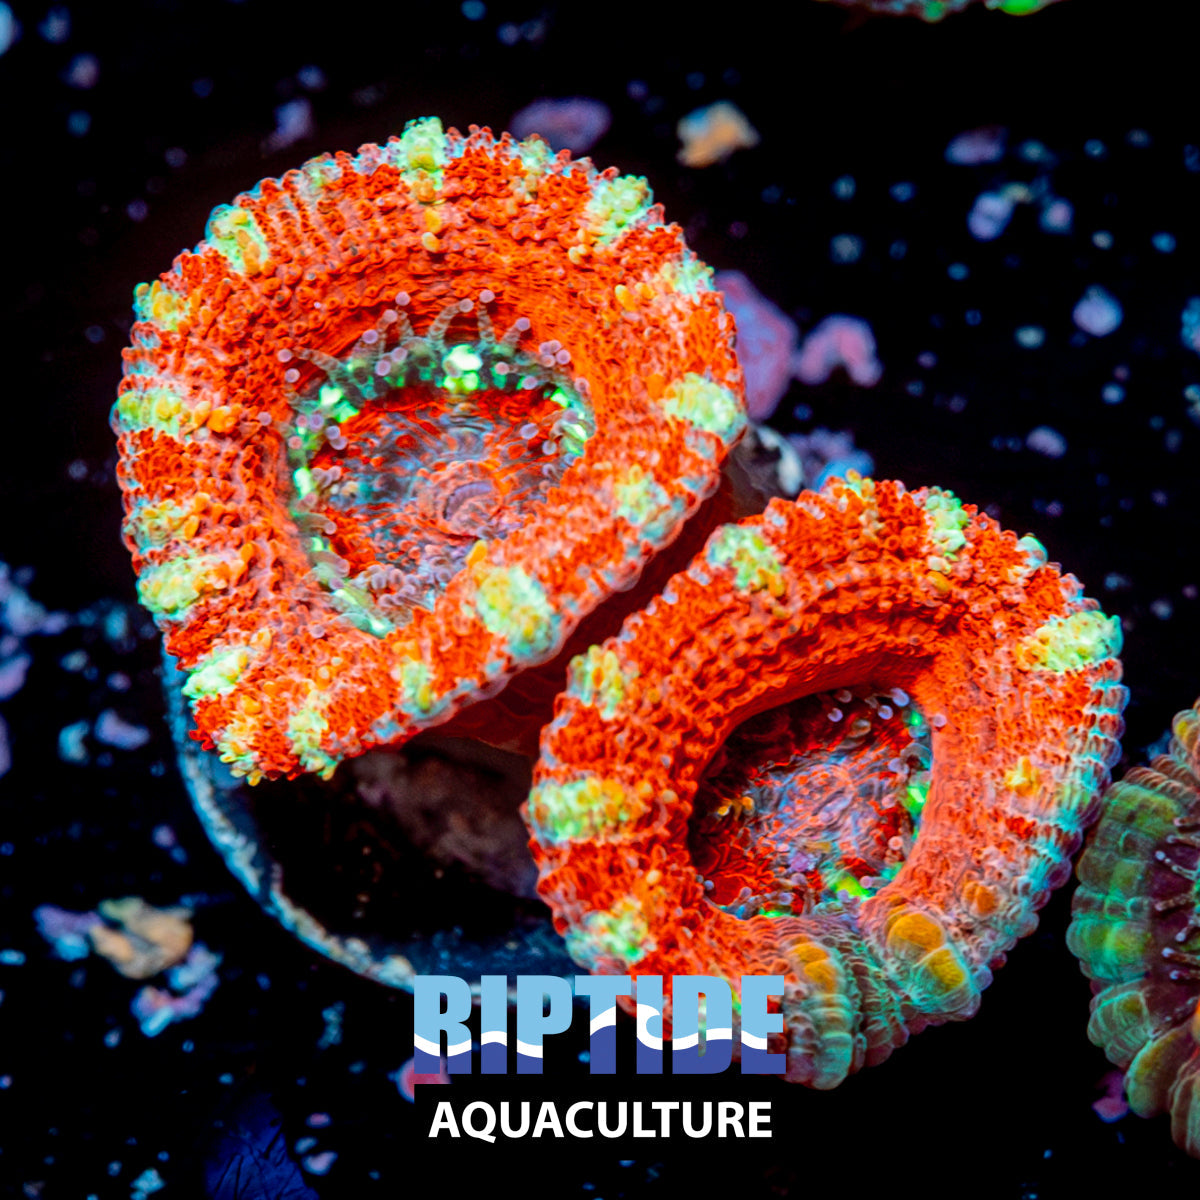 Pink Micromussa / Acan